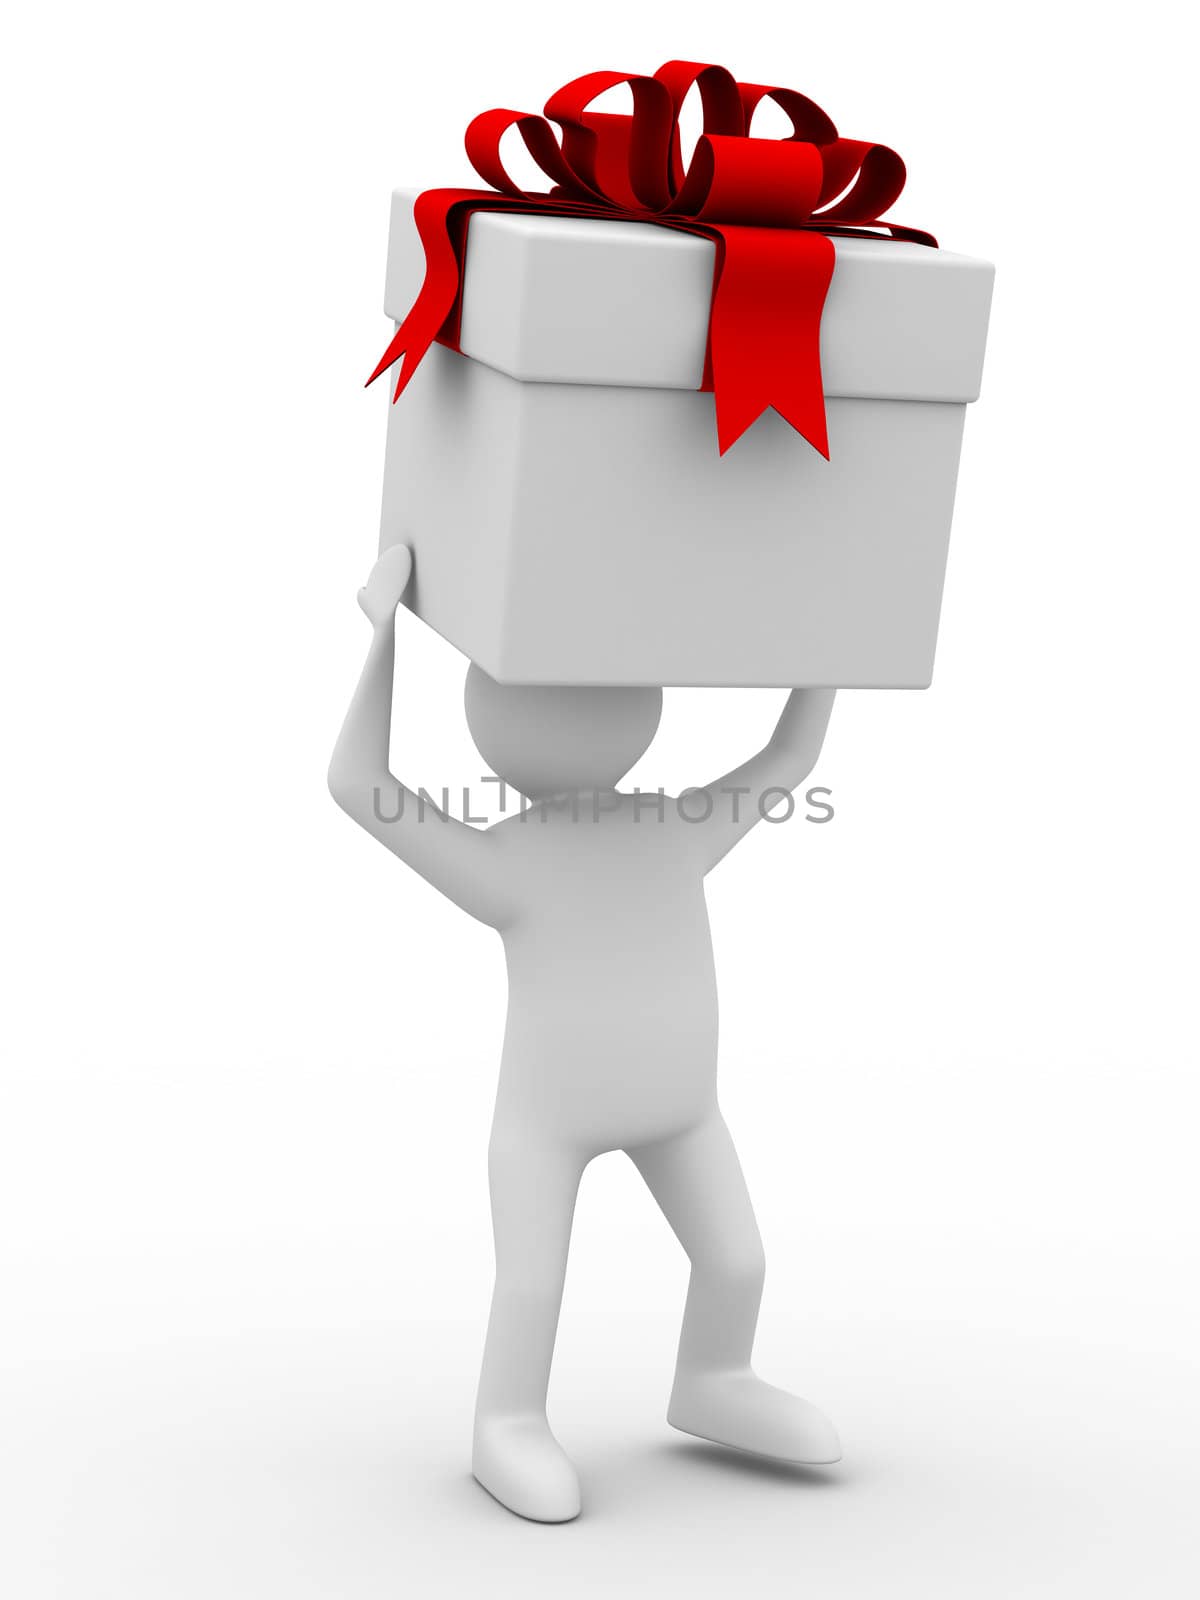 man carry white box. Isolated 3D image